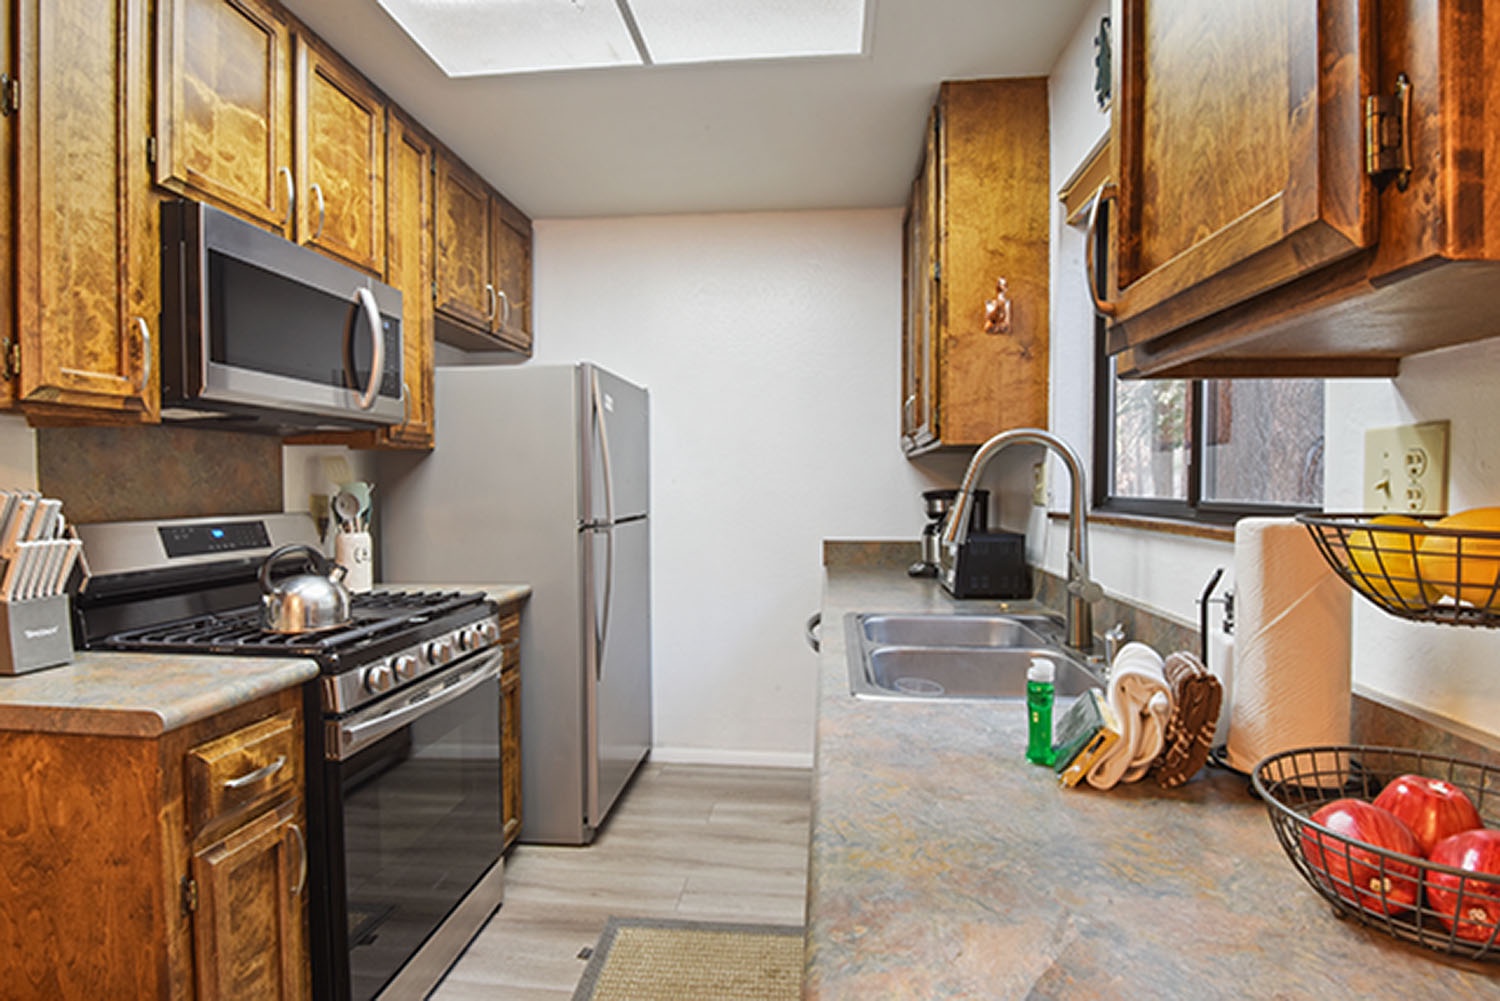 Unit #3: The cozy kitchen is well-equipped and will have you feeling right at home